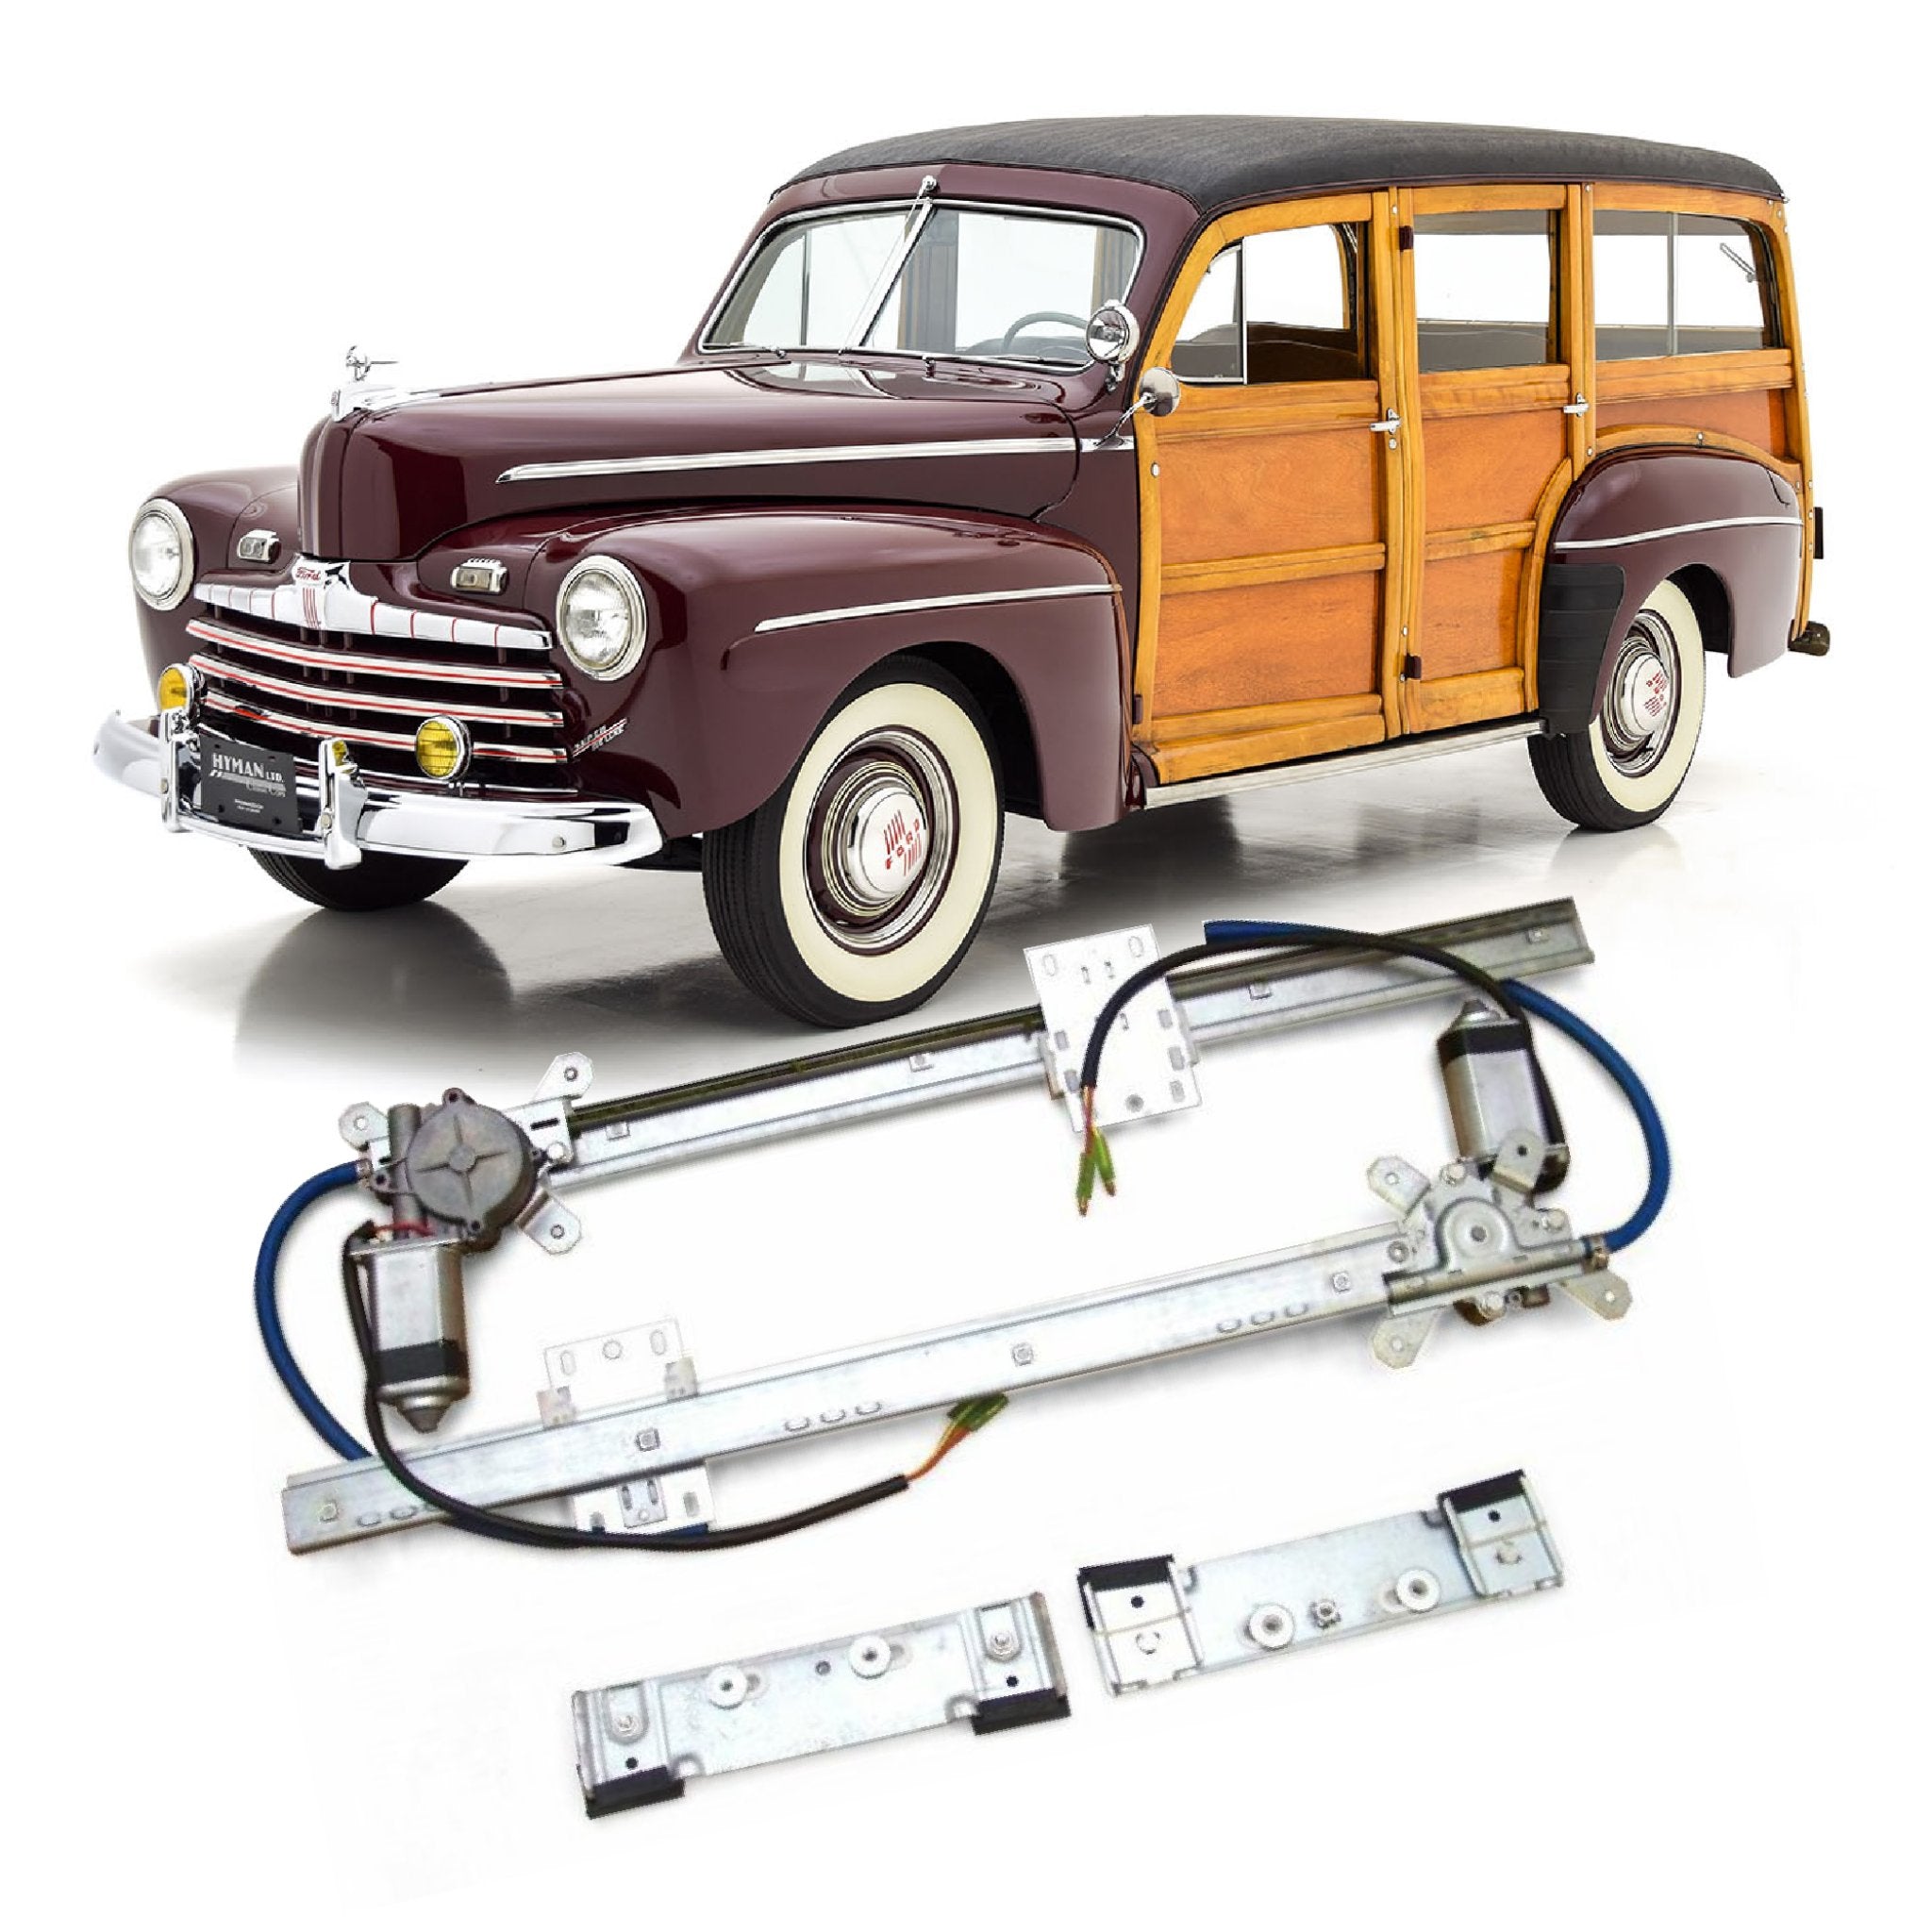 12V Power Window Kit for 1946 Ford Station Wagon Standard Deluxe Super Woody